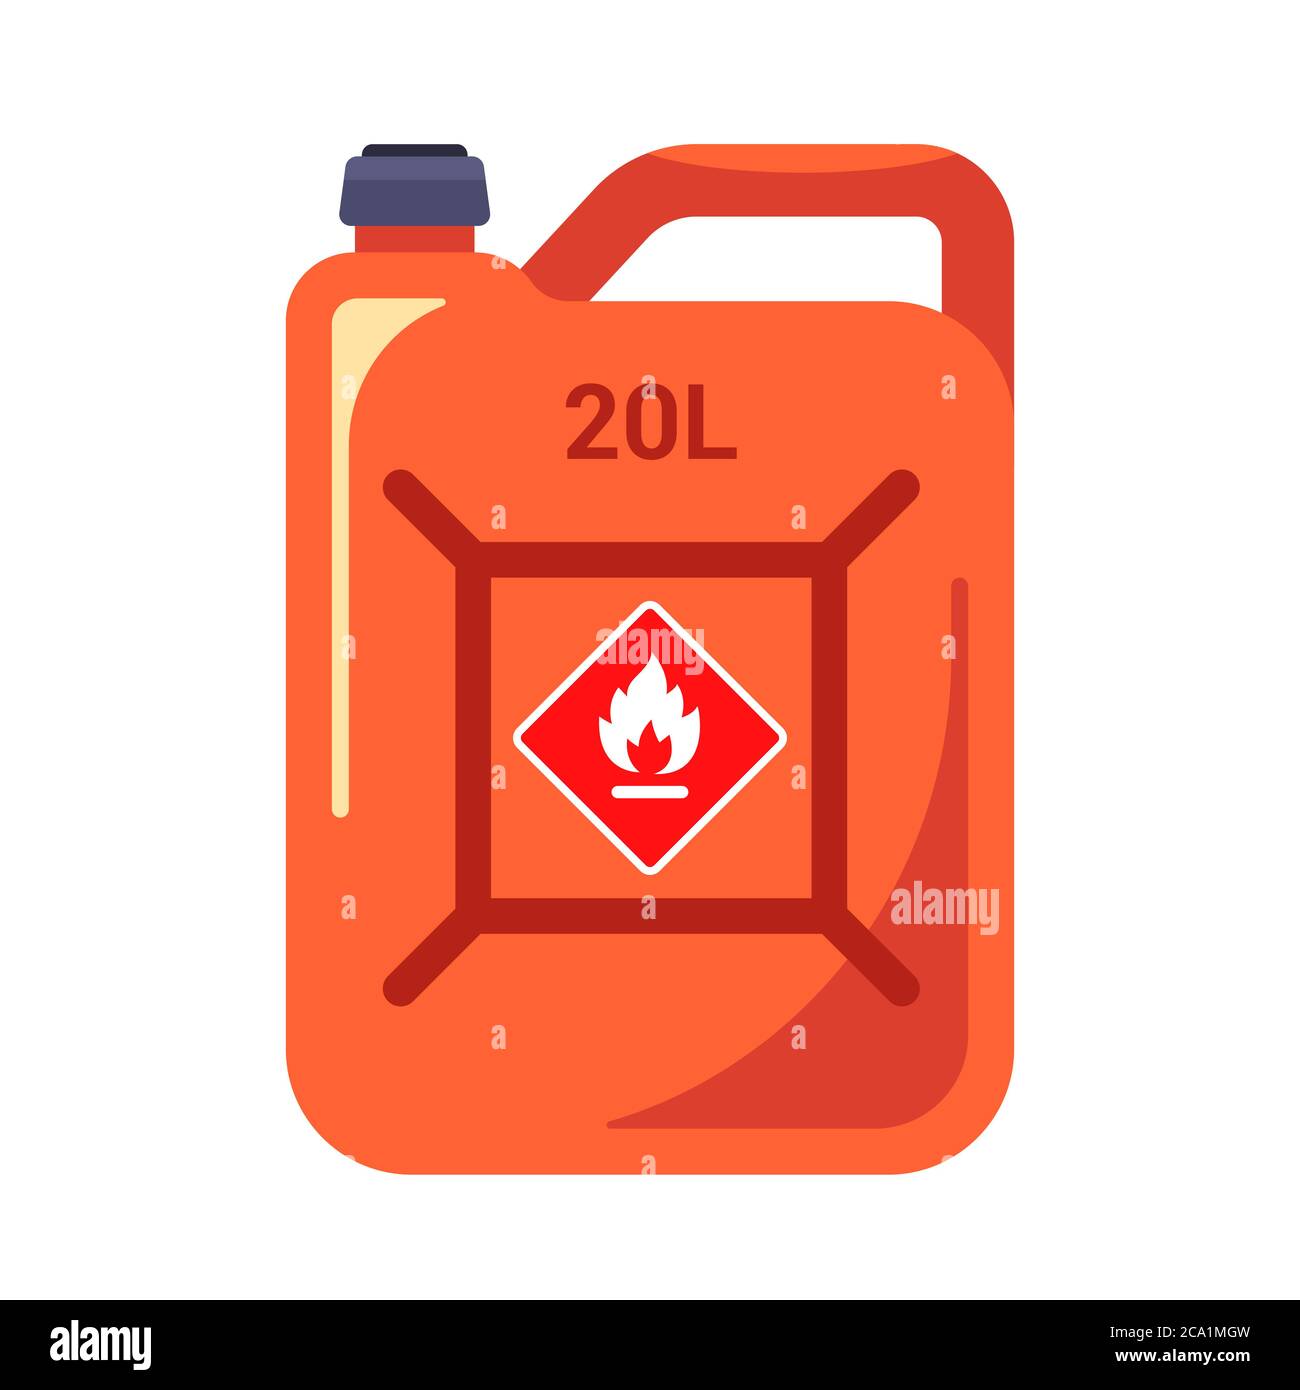 red canister of gasoline. Caution Flammable. flat vector illustration. Stock Vector